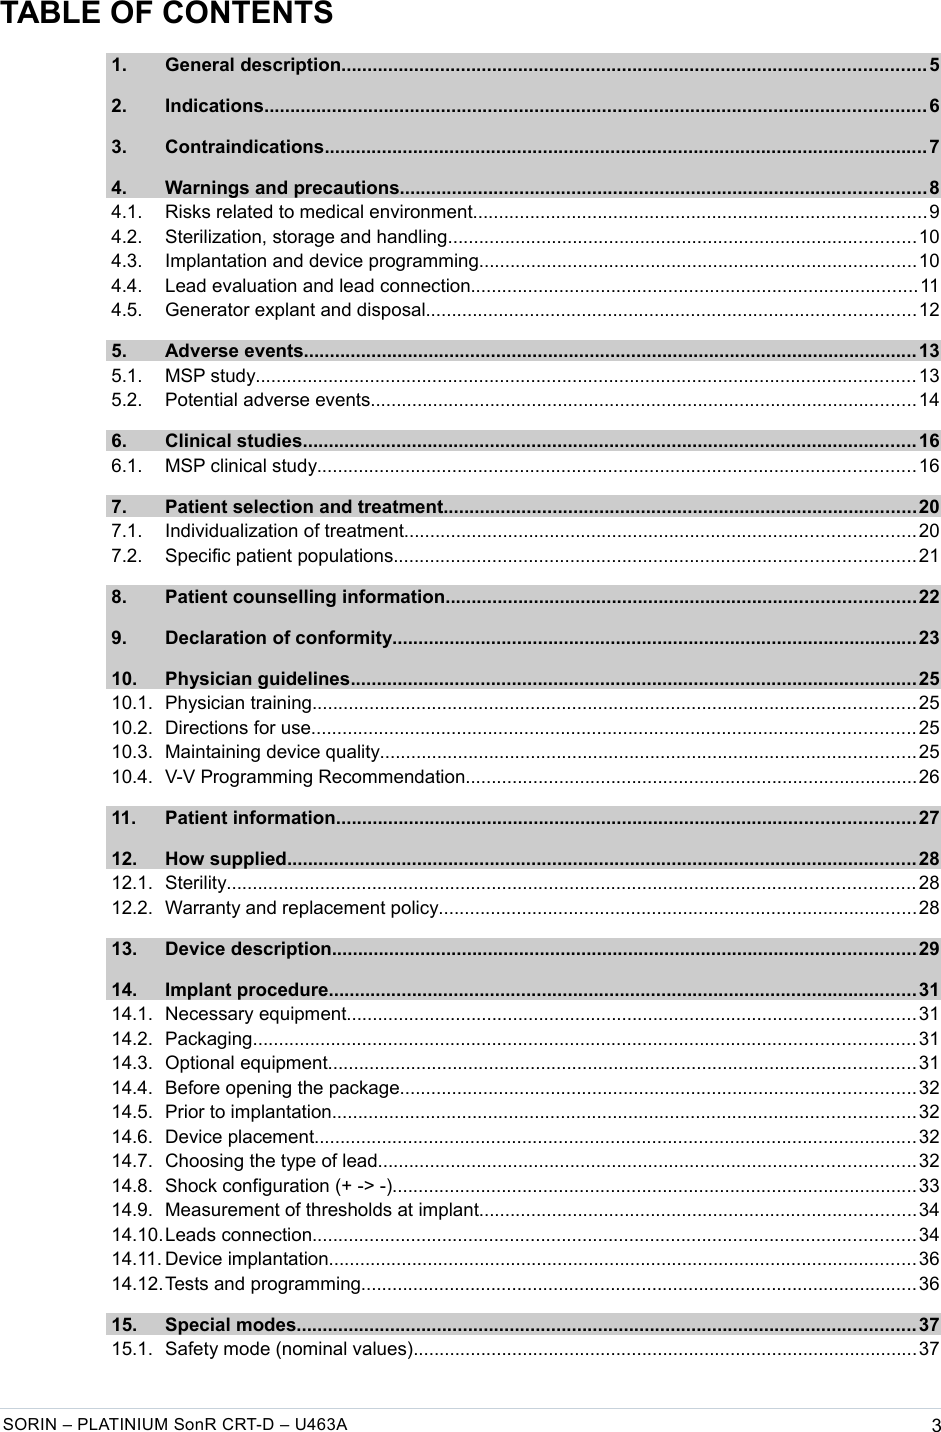   TABLE OF CONTENTS 1. General description................................................................................................................5  2. Indications...............................................................................................................................6  3. Contraindications....................................................................................................................7  4. Warnings and precautions..................................................................................................... 8  4.1. Risks related to medical environment.......................................................................................9  4.2. Sterilization, storage and handling..........................................................................................10  4.3. Implantation and device programming....................................................................................10  4.4. Lead evaluation and lead connection......................................................................................11  4.5. Generator explant and disposal..............................................................................................12  5. Adverse events...................................................................................................................... 13  5.1. MSP study...............................................................................................................................13  5.2. Potential adverse events.........................................................................................................14  6. Clinical studies......................................................................................................................16  6.1. MSP clinical study...................................................................................................................16  7. Patient selection and treatment...........................................................................................20  7.1. Individualization of treatment..................................................................................................20  7.2. Specific patient populations....................................................................................................21  8. Patient counselling information..........................................................................................22  9. Declaration of conformity.....................................................................................................23  10. Physician guidelines.............................................................................................................25  10.1. Physician training....................................................................................................................25  10.2. Directions for use....................................................................................................................25  10.3. Maintaining device quality.......................................................................................................25  10.4. V-V Programming Recommendation.......................................................................................26  11. Patient information...............................................................................................................27  12. How supplied.........................................................................................................................28  12.1. Sterility....................................................................................................................................28  12.2. Warranty and replacement policy............................................................................................28  13. Device description................................................................................................................29  14. Implant procedure.................................................................................................................31  14.1. Necessary equipment.............................................................................................................31  14.2. Packaging...............................................................................................................................31  14.3. Optional equipment.................................................................................................................31  14.4. Before opening the package...................................................................................................32  14.5. Prior to implantation................................................................................................................32  14.6. Device placement.................................................................................................................... 32  14.7. Choosing the type of lead.......................................................................................................32  14.8. Shock configuration (+ -&gt; -).....................................................................................................33  14.9. Measurement of thresholds at implant....................................................................................34  14.10.Leads connection....................................................................................................................34  14.11. Device implantation.................................................................................................................36  14.12.Tests and programming...........................................................................................................36  15. Special modes.......................................................................................................................37  15.1. Safety mode (nominal values).................................................................................................37 SORIN – PLATINIUM SonR CRT-D – U463A 3